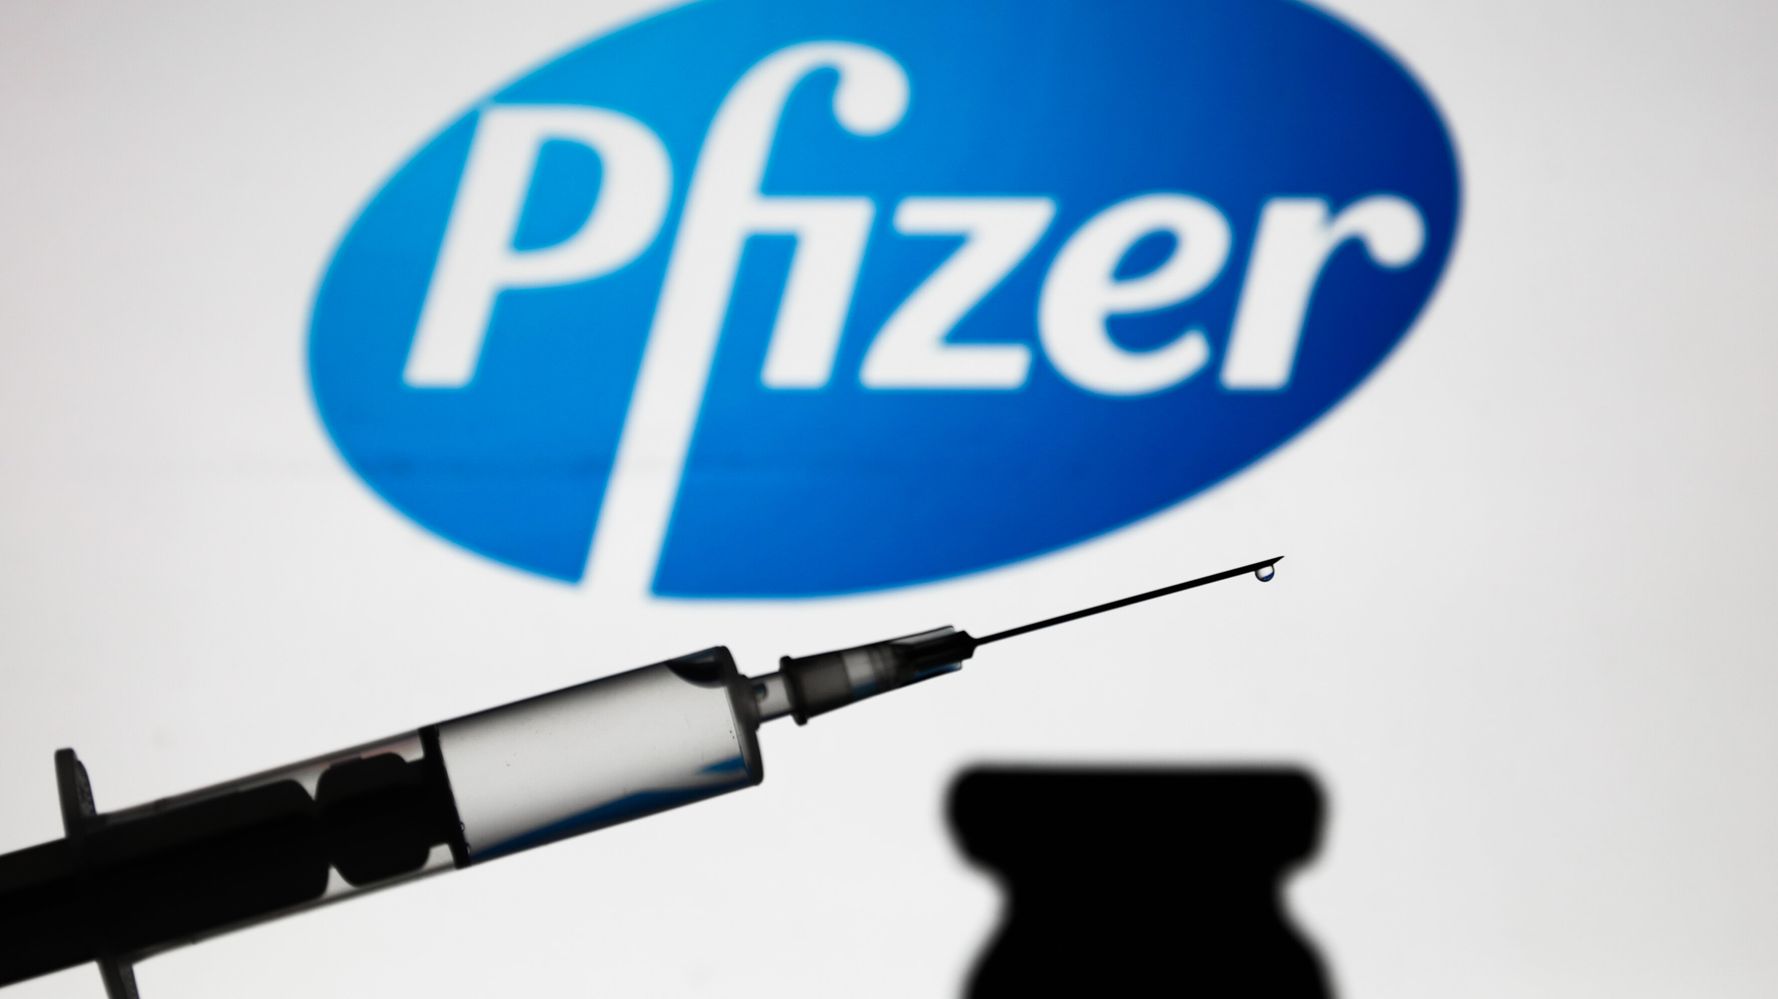 Pfizer Says COVID-19 Trial Ends With 95% Efficacy, Will Seek Authorization